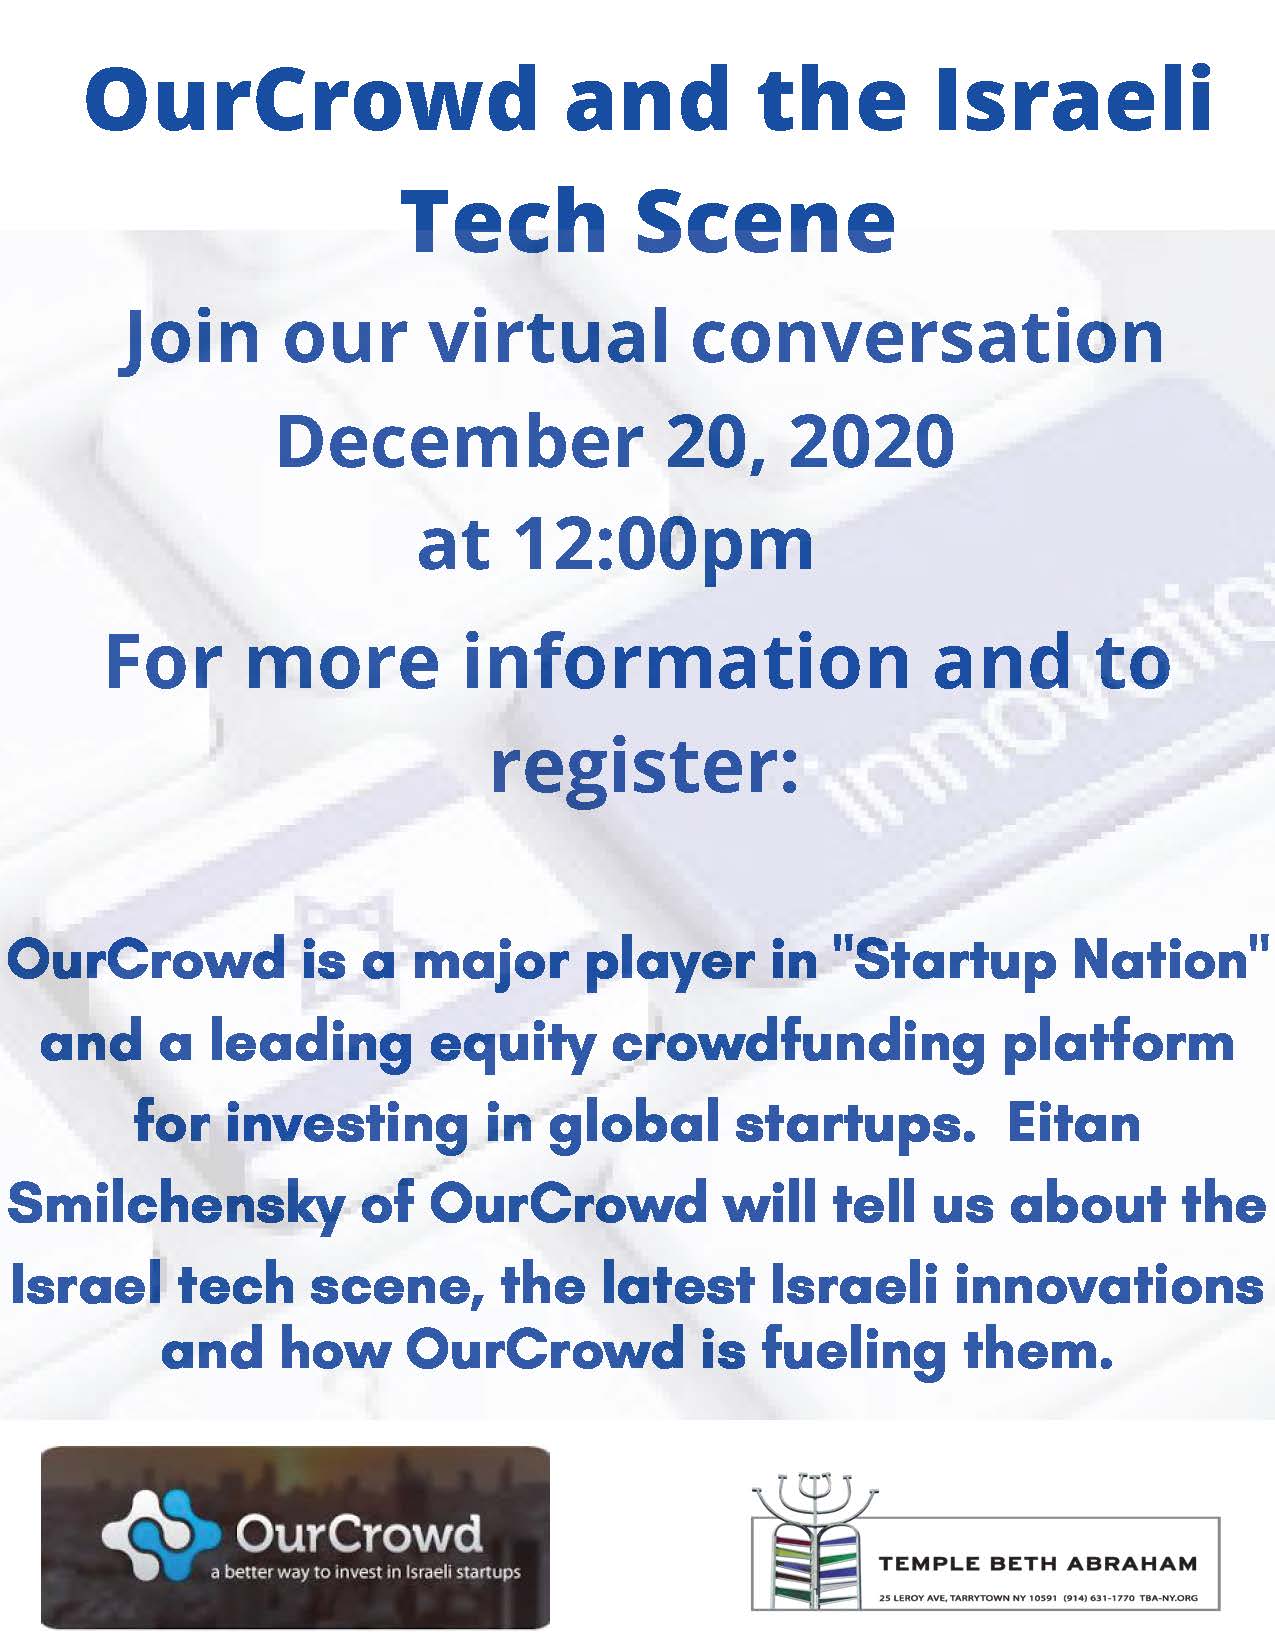 OurCrowd and the Israeli Tech Scene